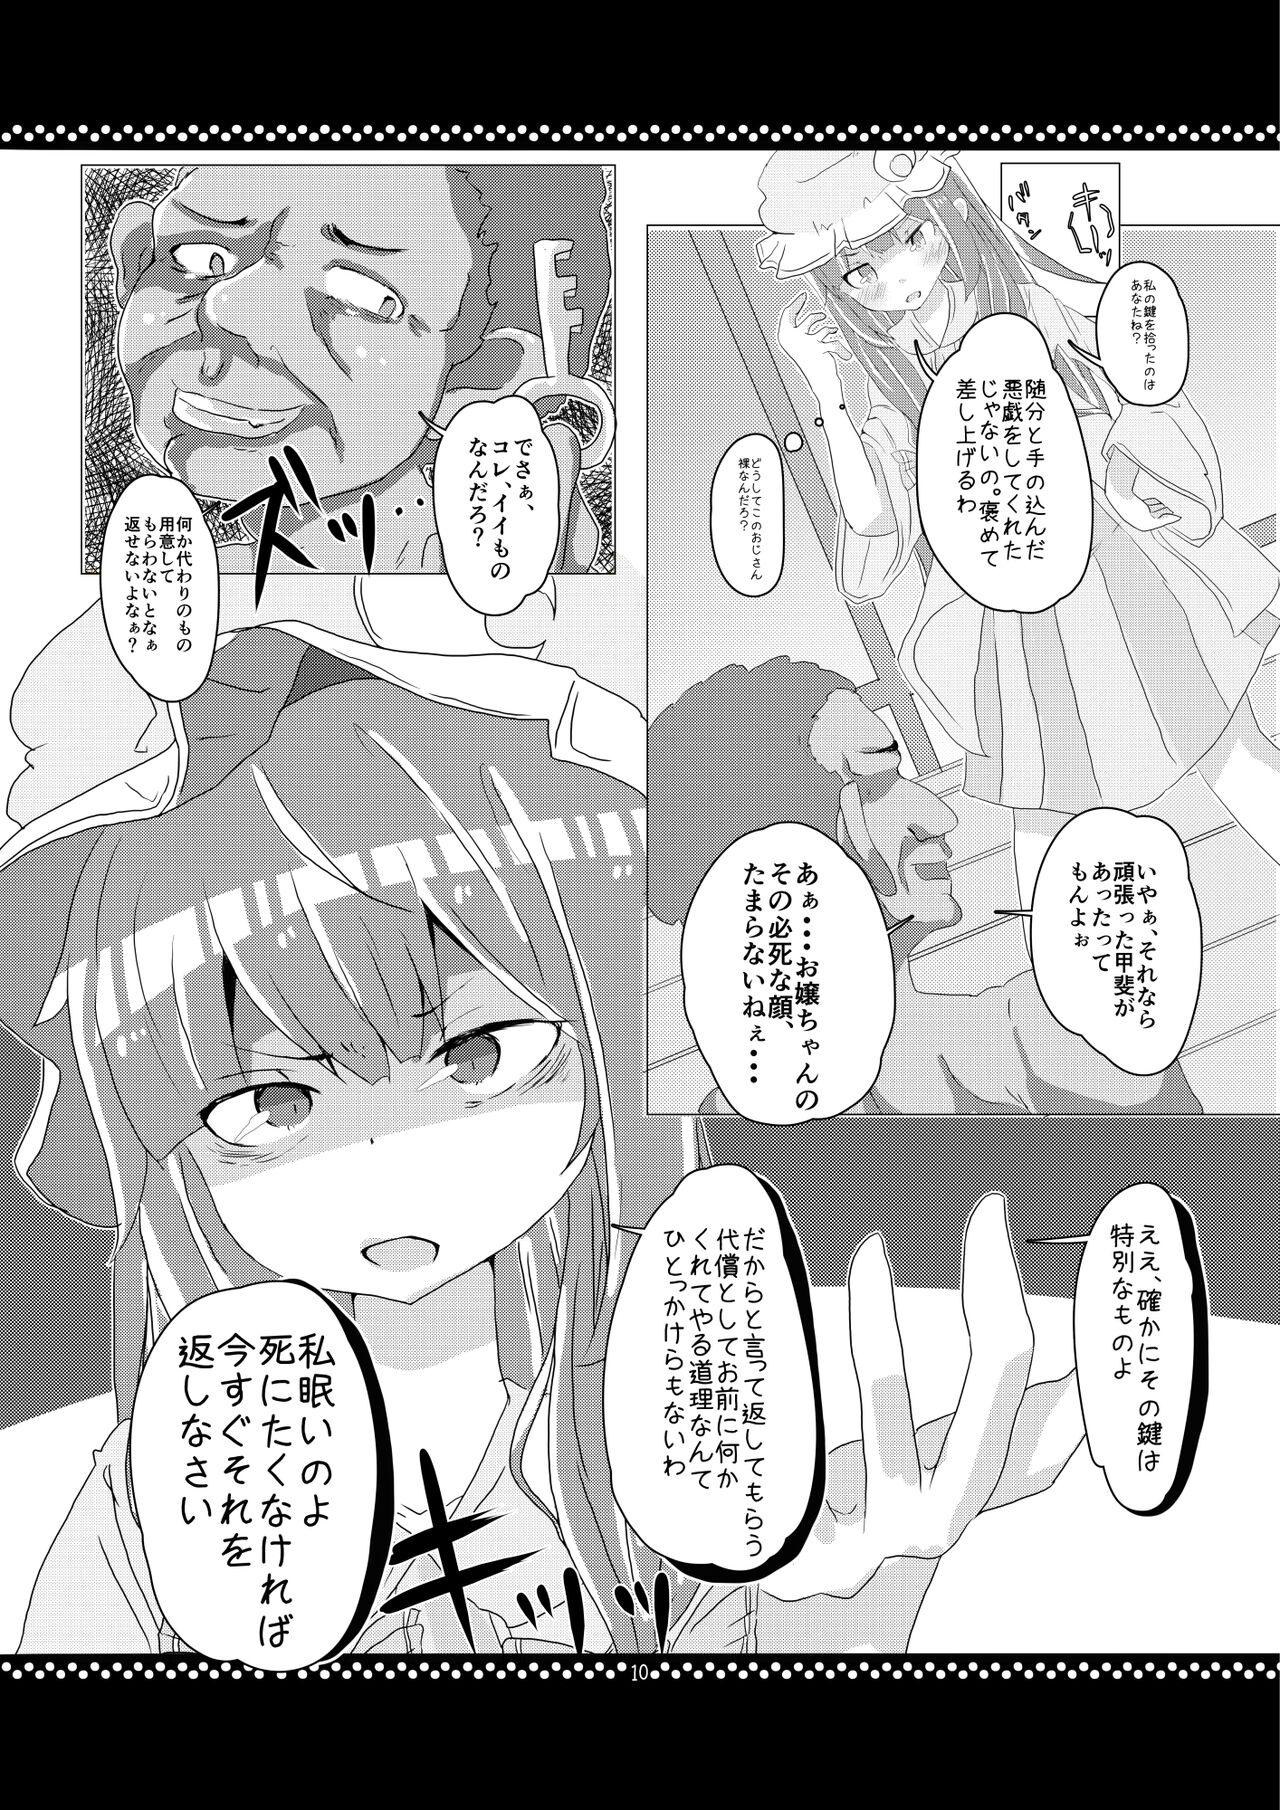 Oral Sex 従順？パチュリーさま！ - Touhou project Reverse - Page 9